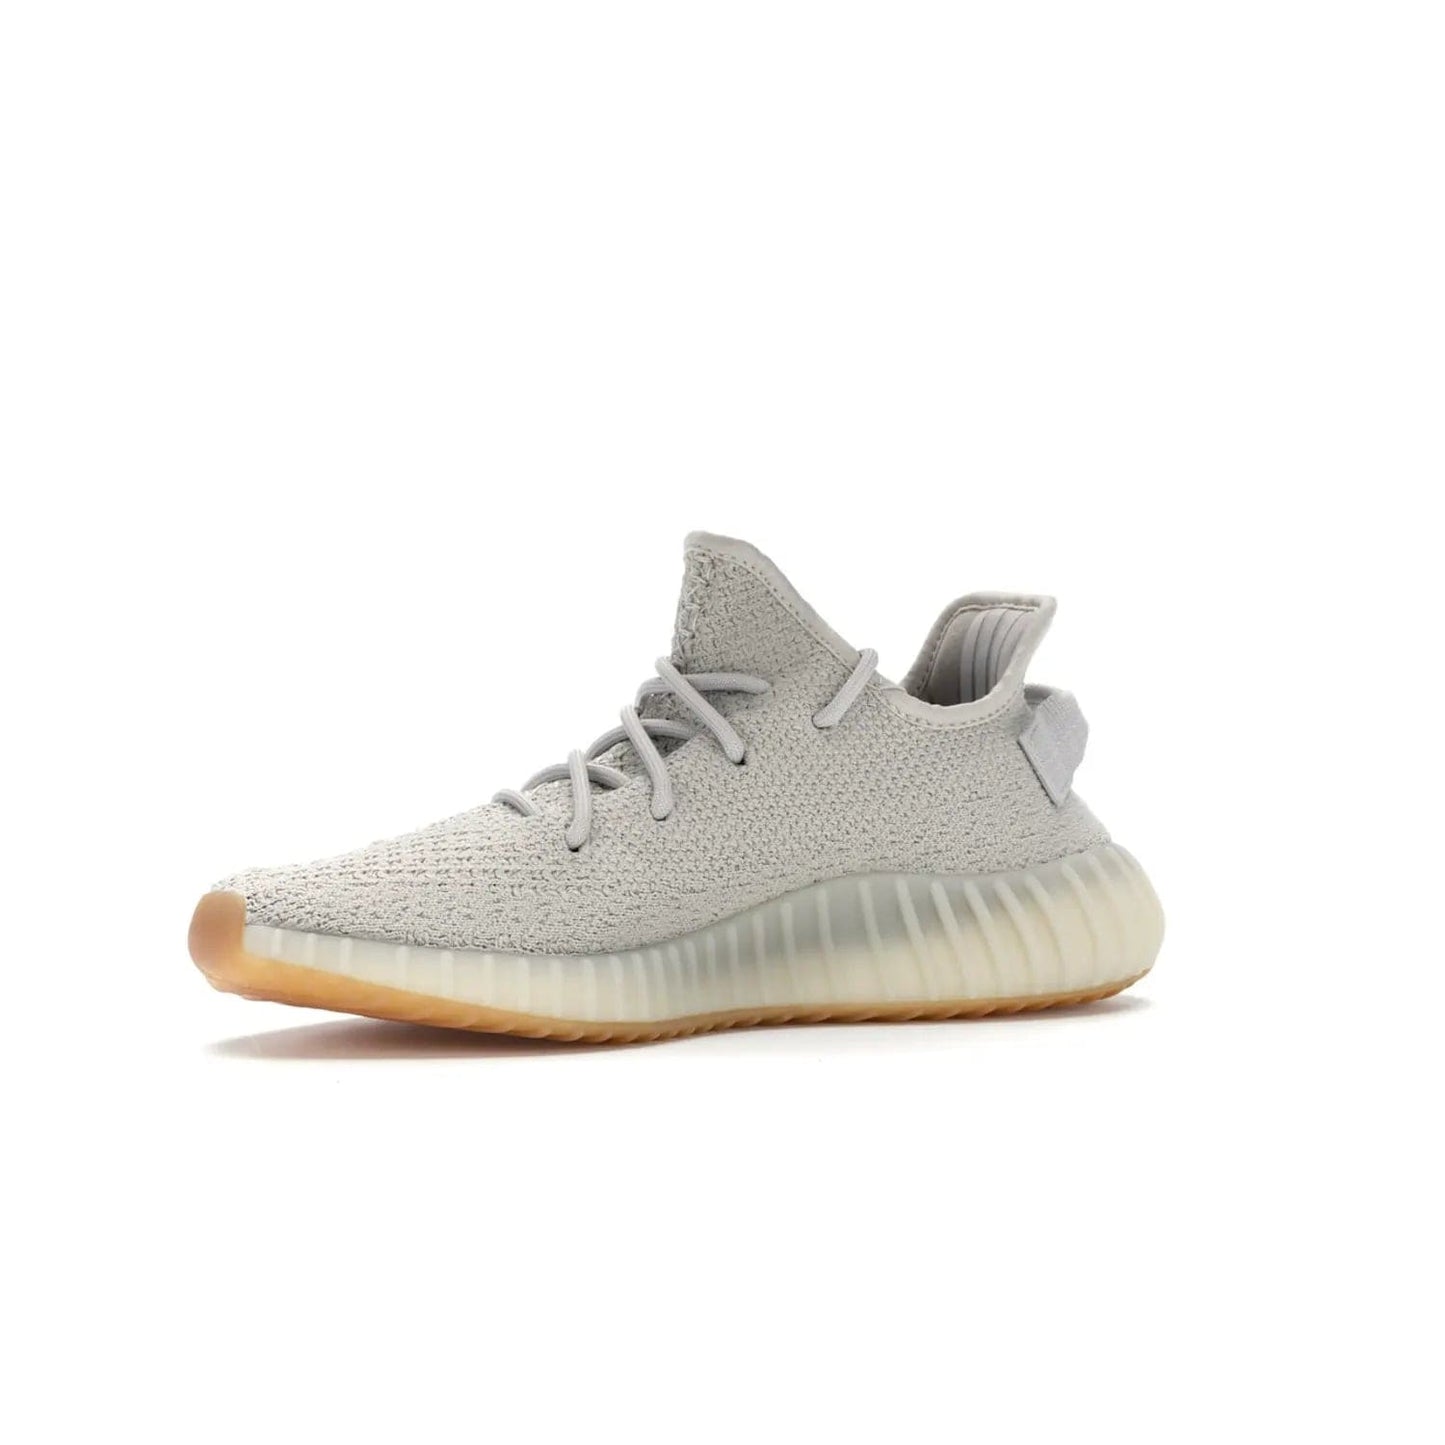 adidas Yeezy Boost 350 V2 Sesame - Image 17 - Only at www.BallersClubKickz.com - Introducing the adidas Yeezy Boost 350 V2 Sesame. Featuring a sesame upper, midsole and gum sole for a sleek silhouette. Cop the stylish sneaker released in November 2018.